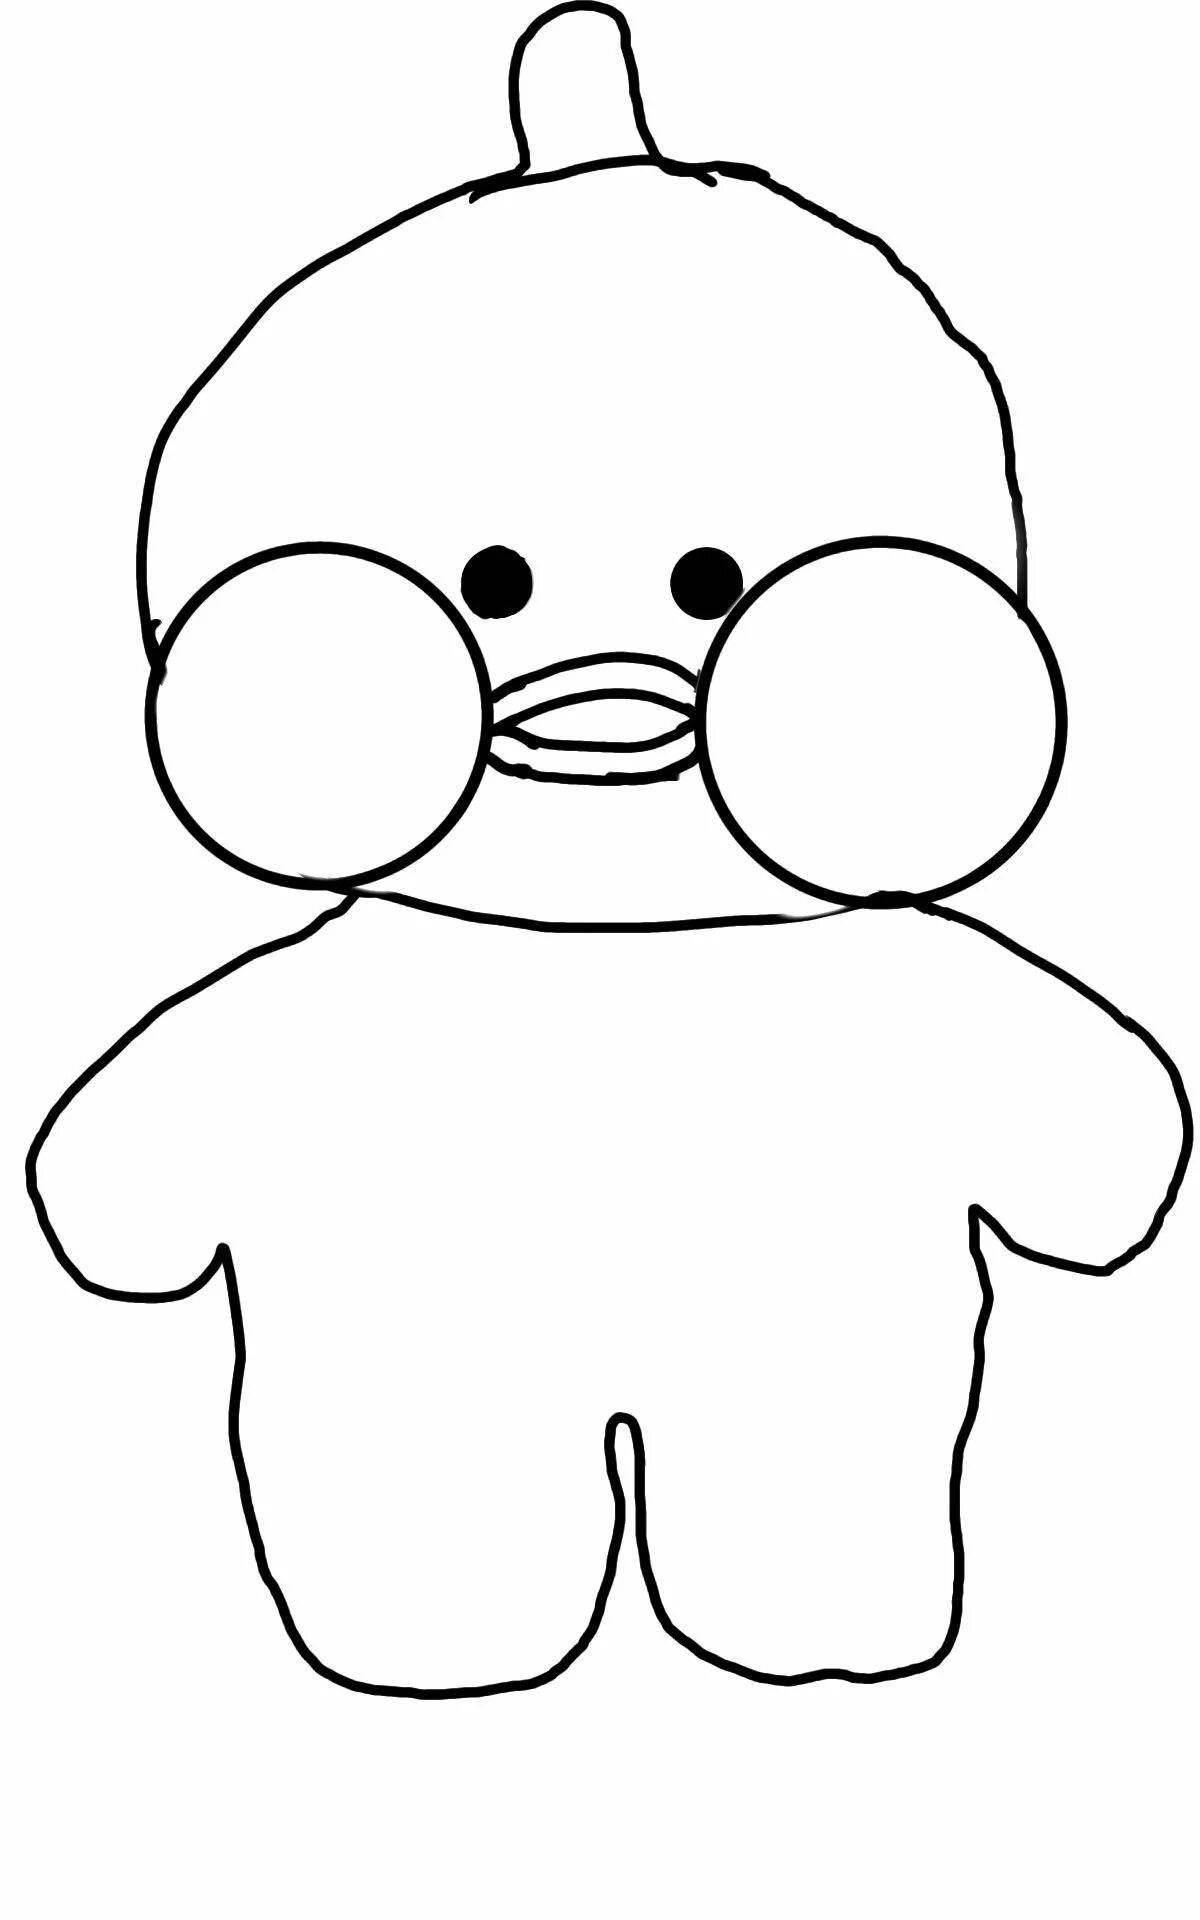 Flawless Duck coloring page by tik tok